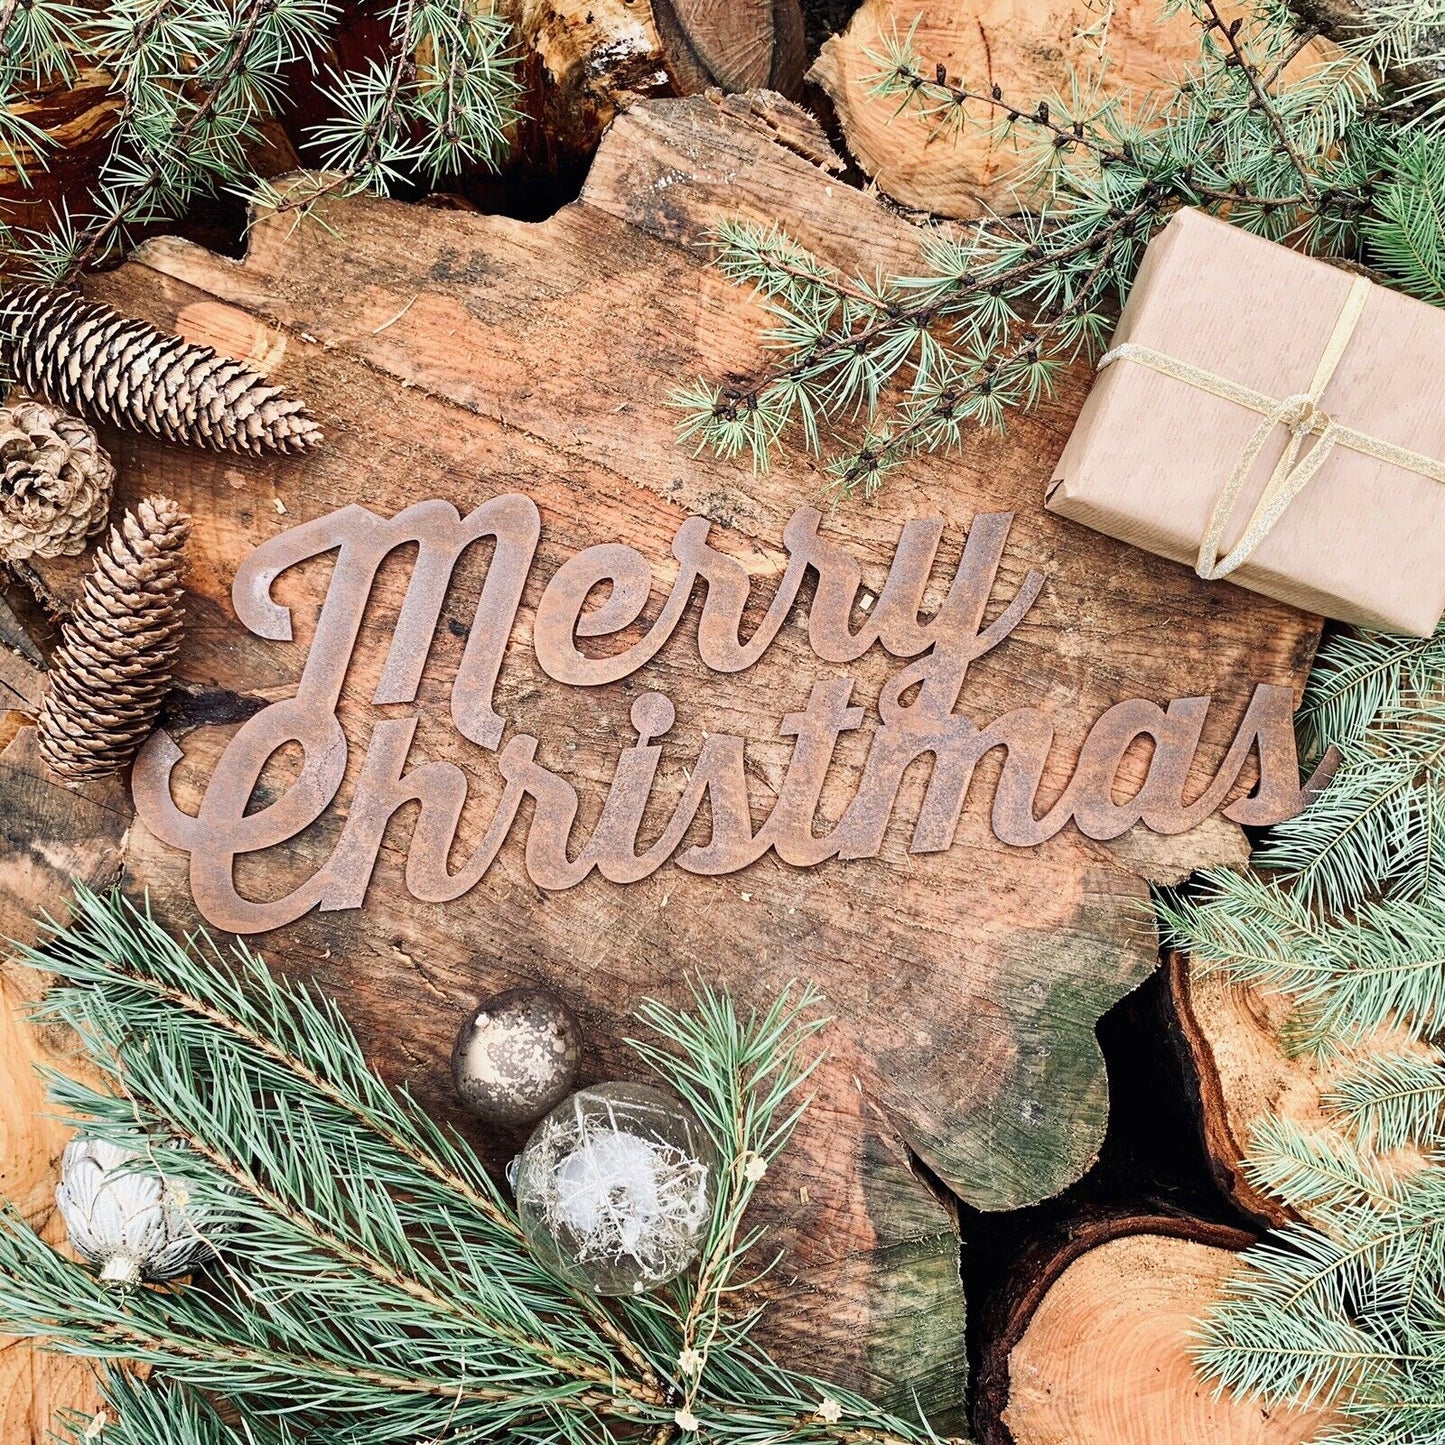 Rusted metal merry Christmas word sign